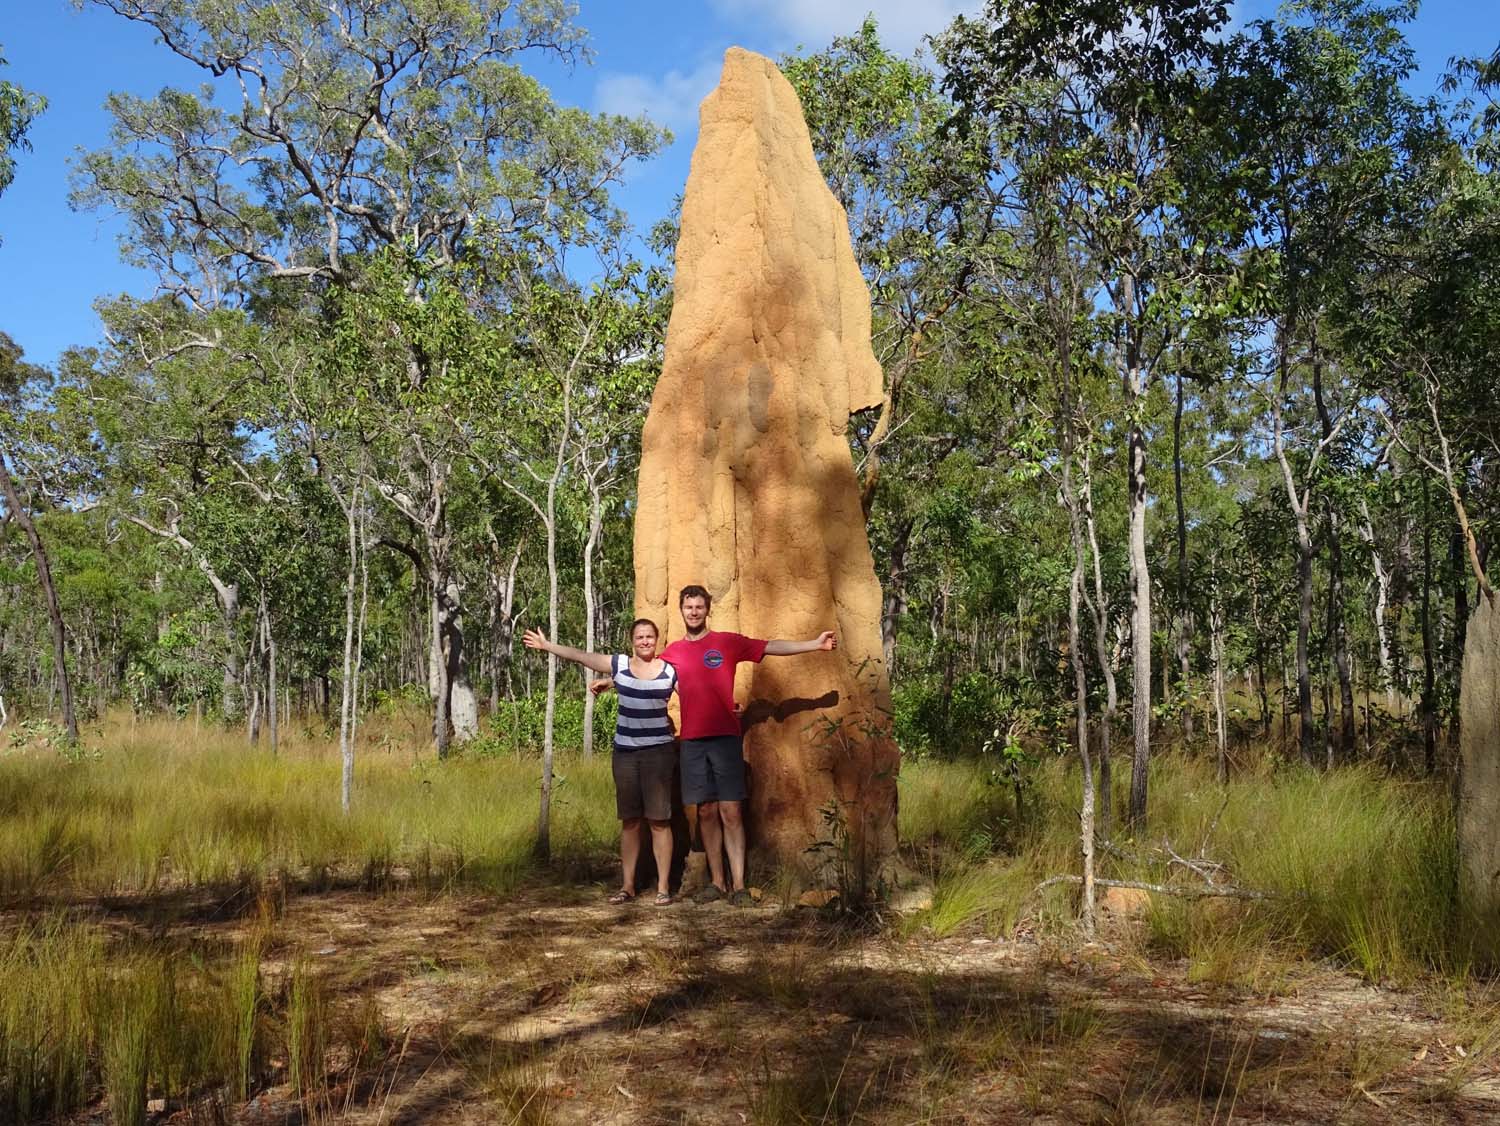 they have some huge termite mounds here